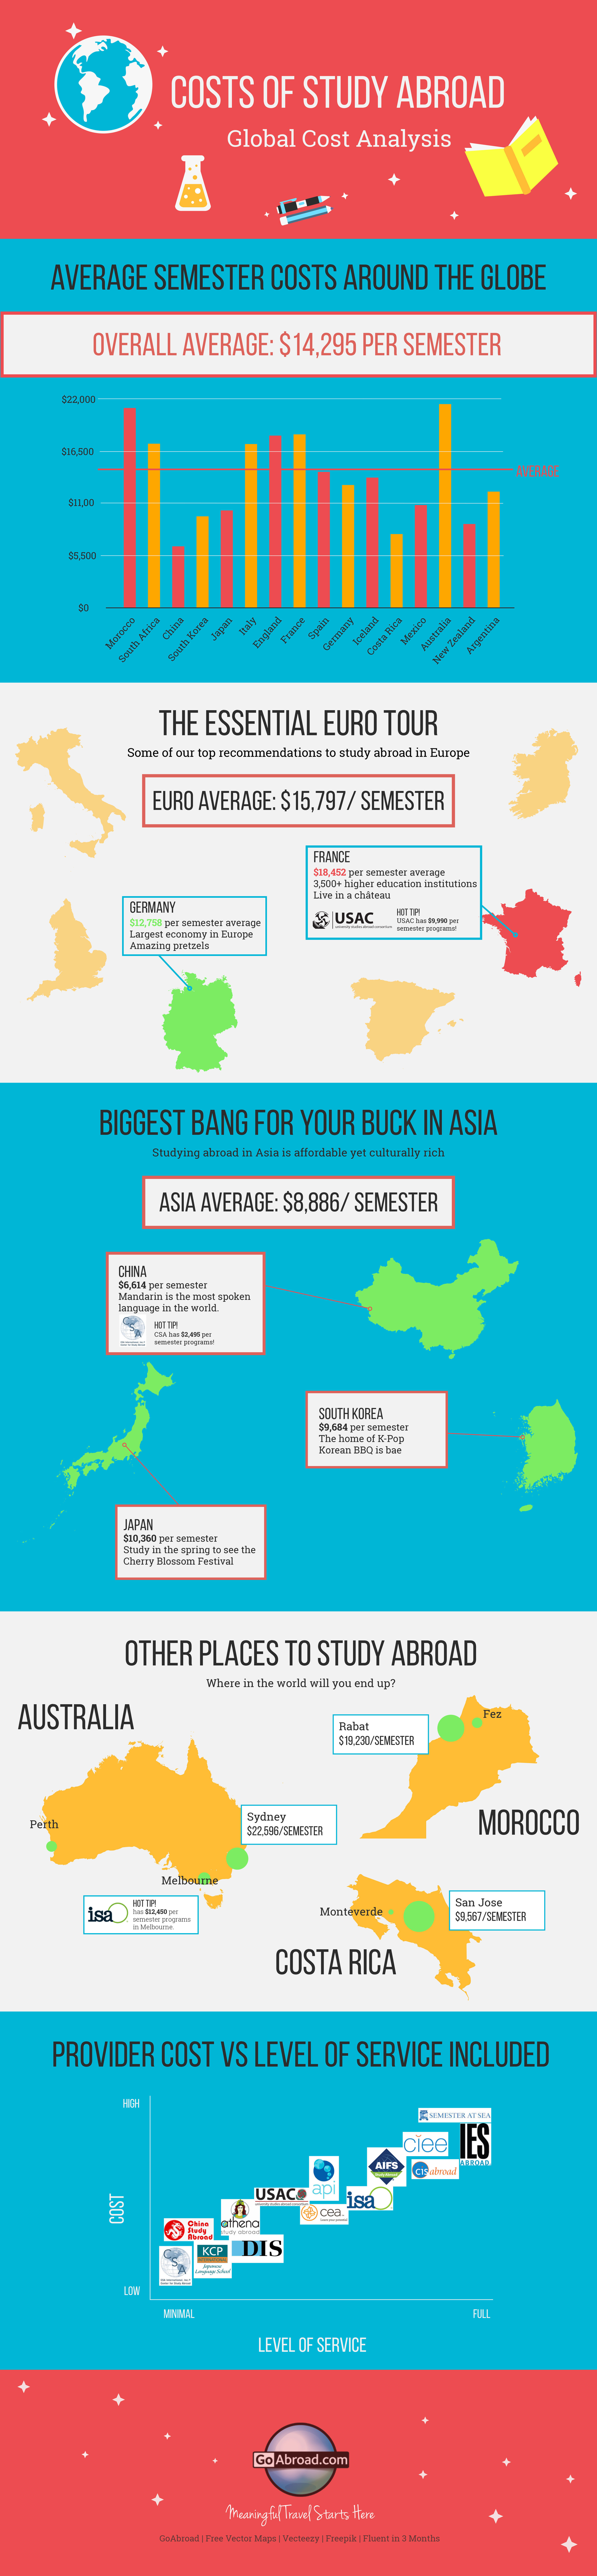 The Avg. Cost of Study Abroad Programs Around the World